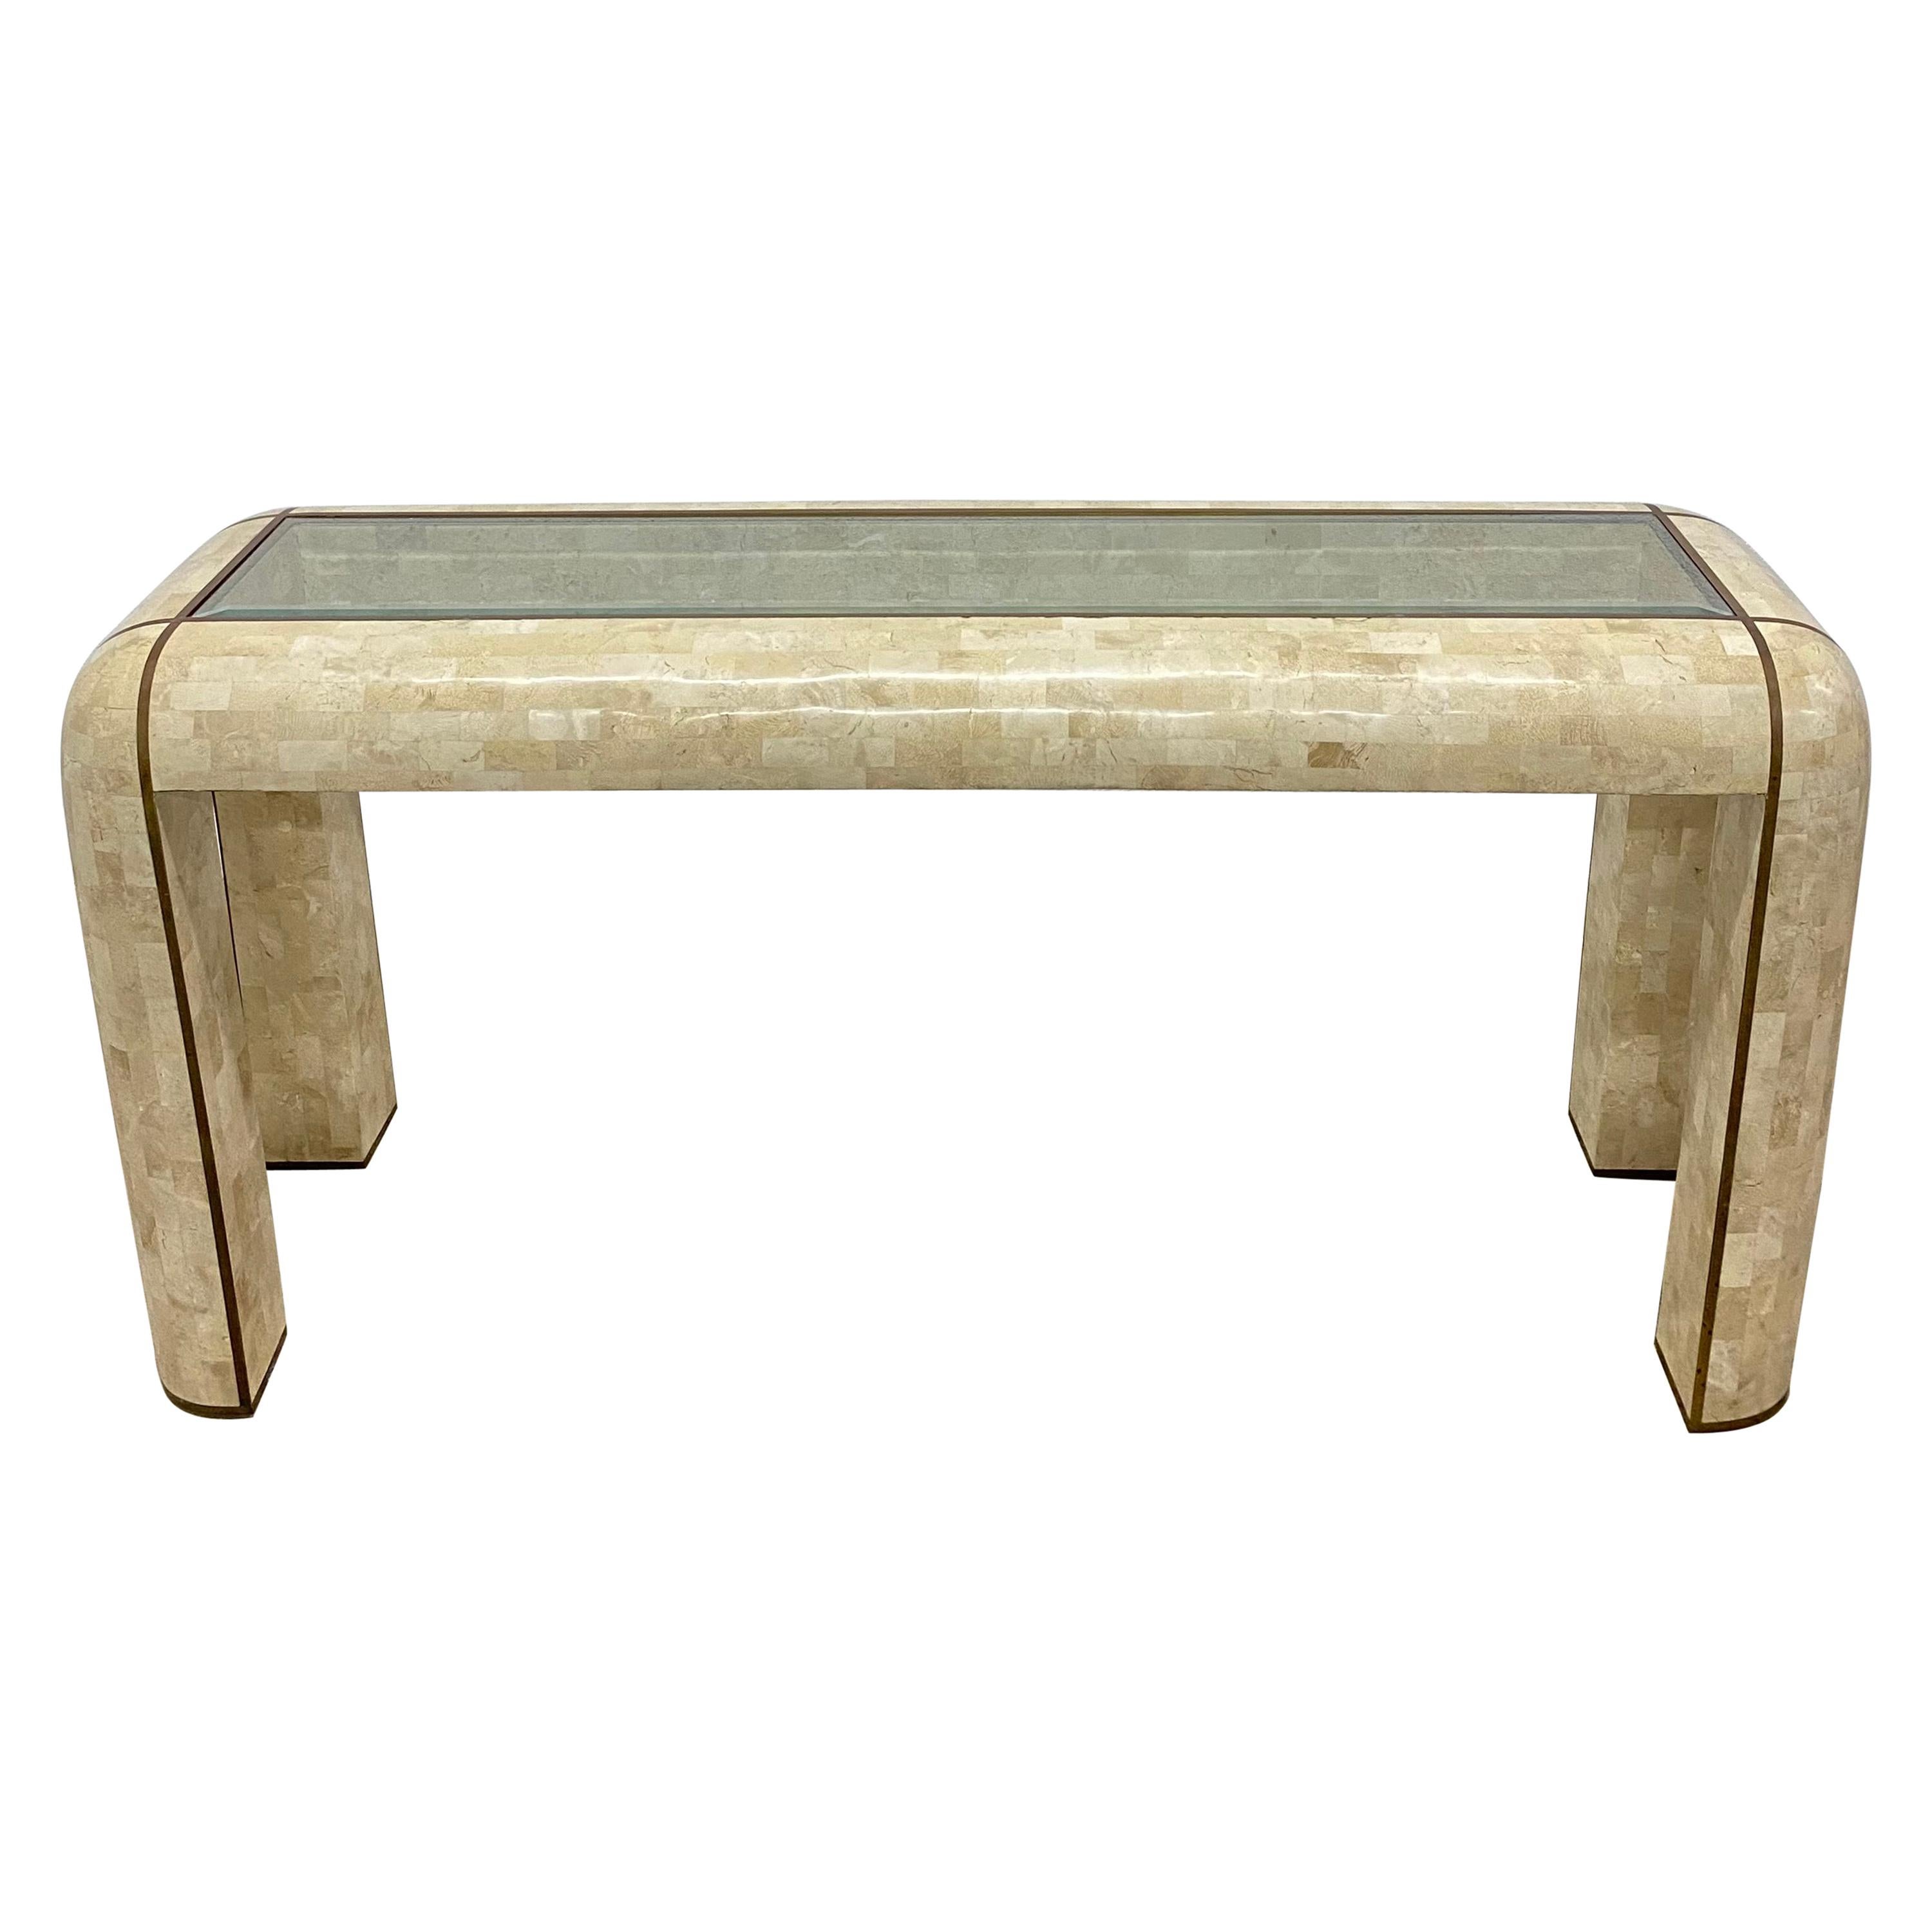 Maitland Smith Tessellated Stone & Brass Inlay Console Table with Glass Insert